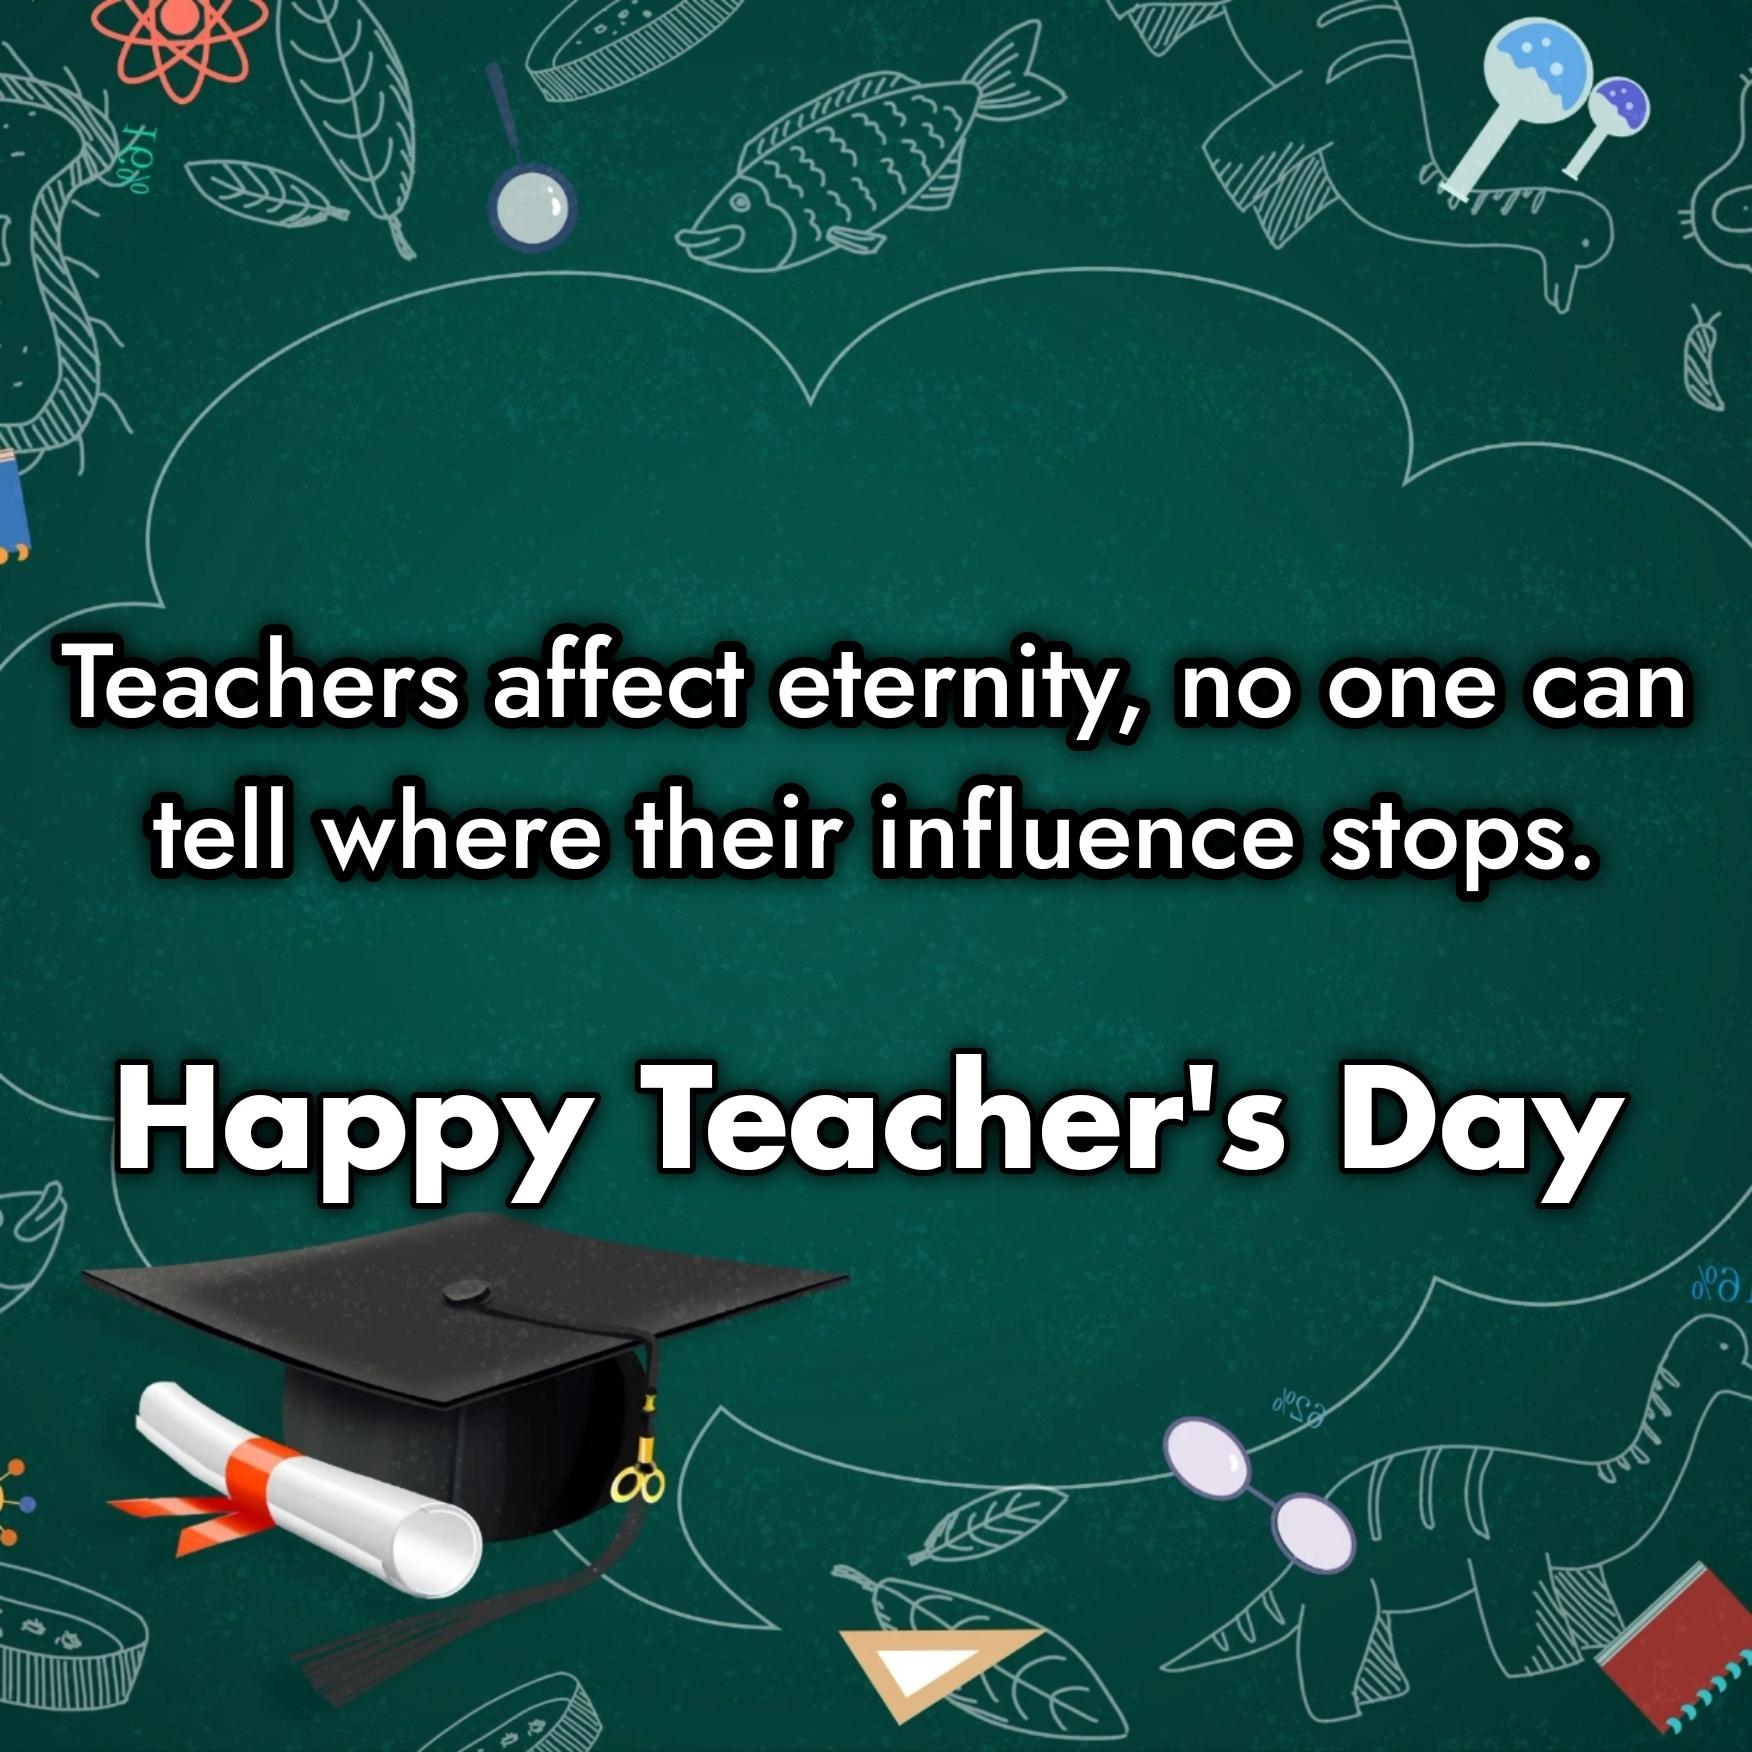 Teachers affect eternity no one can tell where their influence stops.